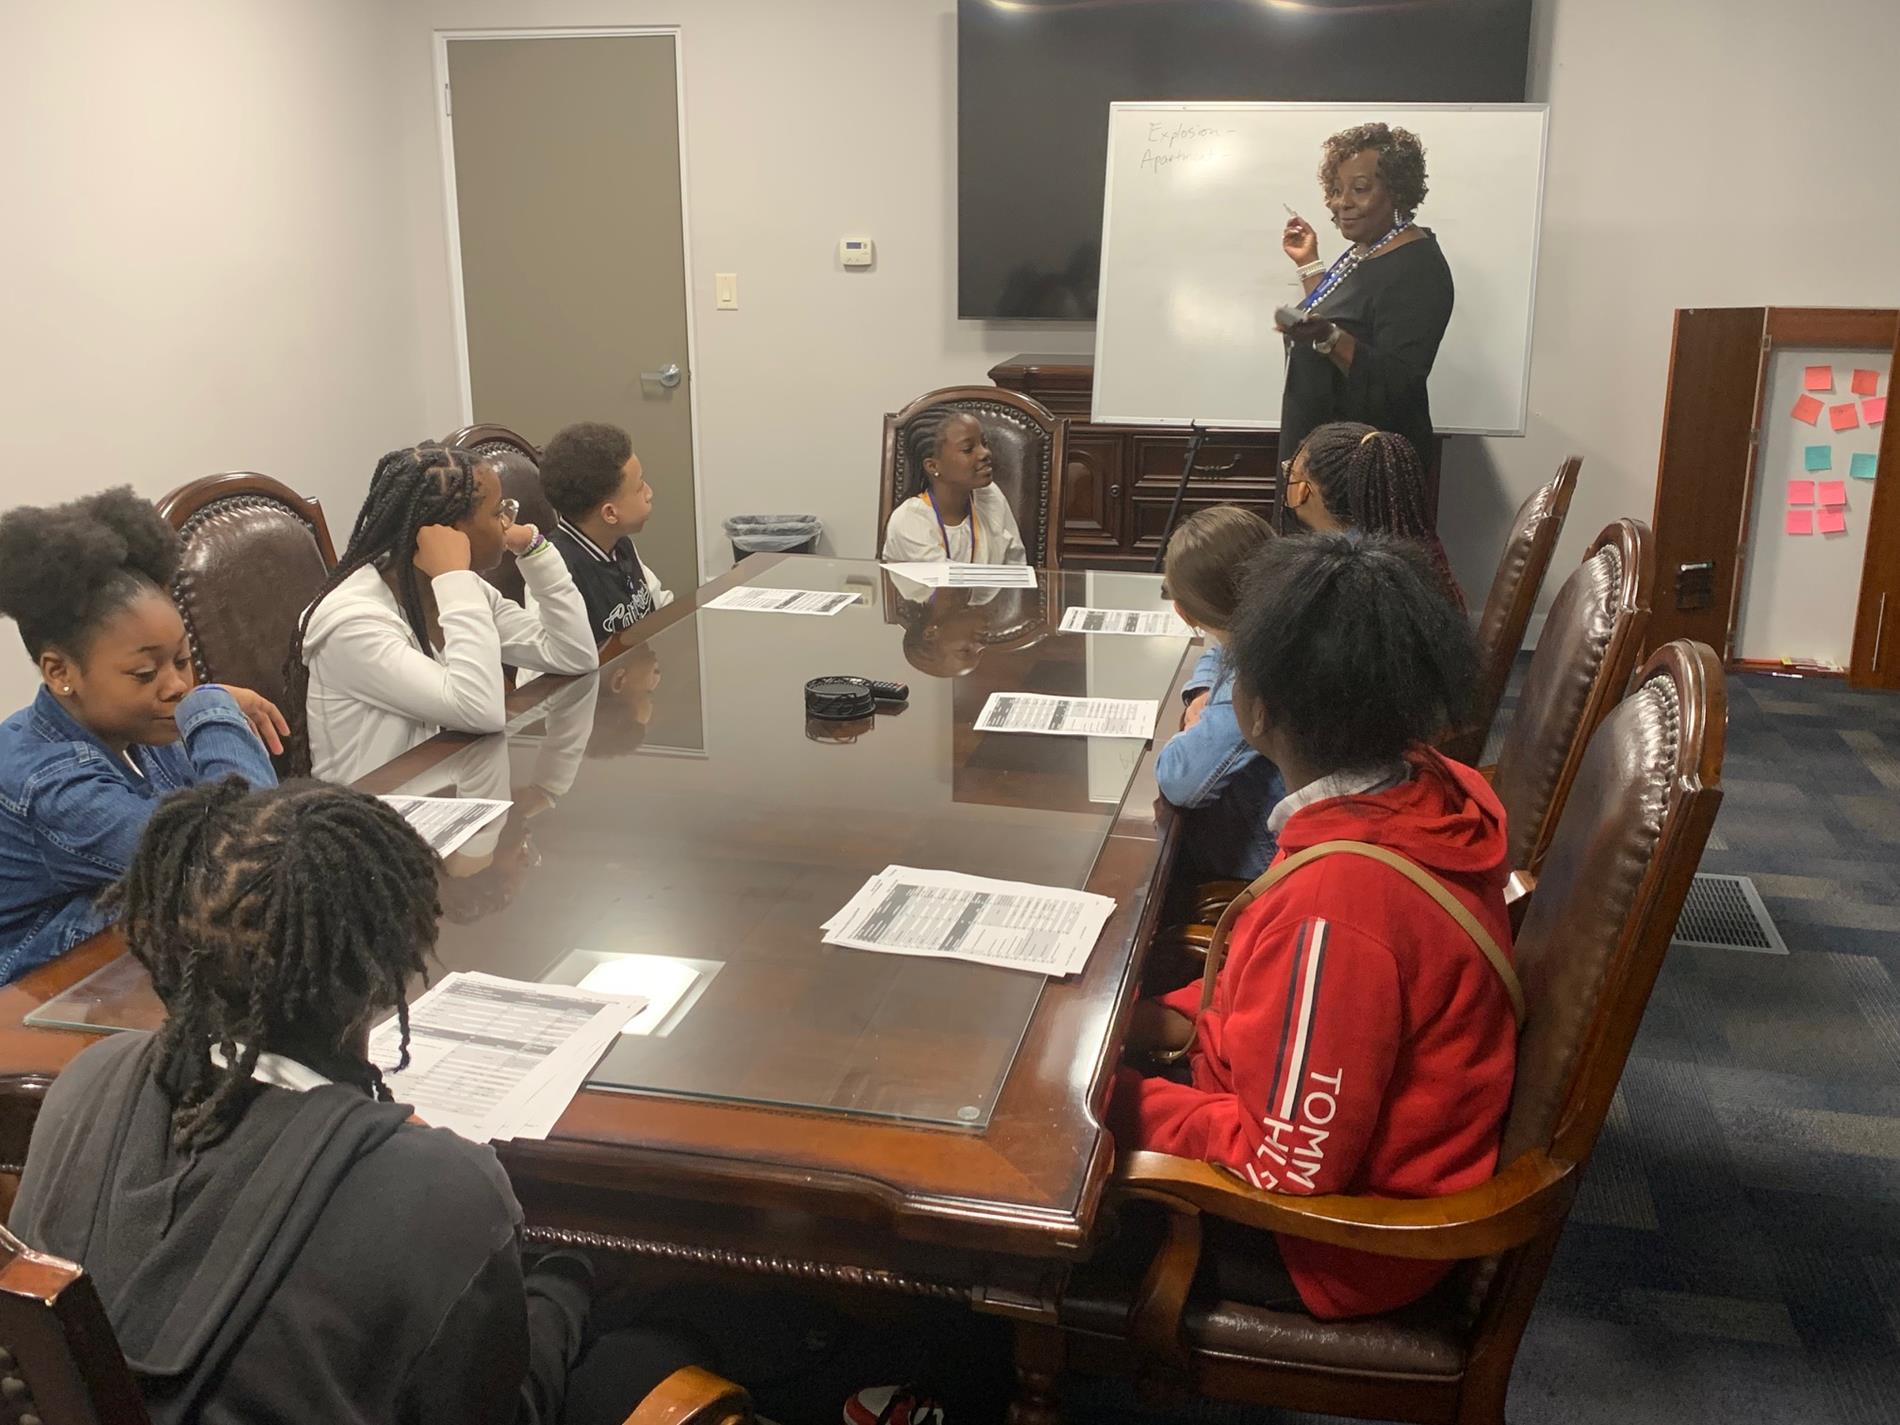 The Stewart County Schools’ Journalism Club visited WRBL 